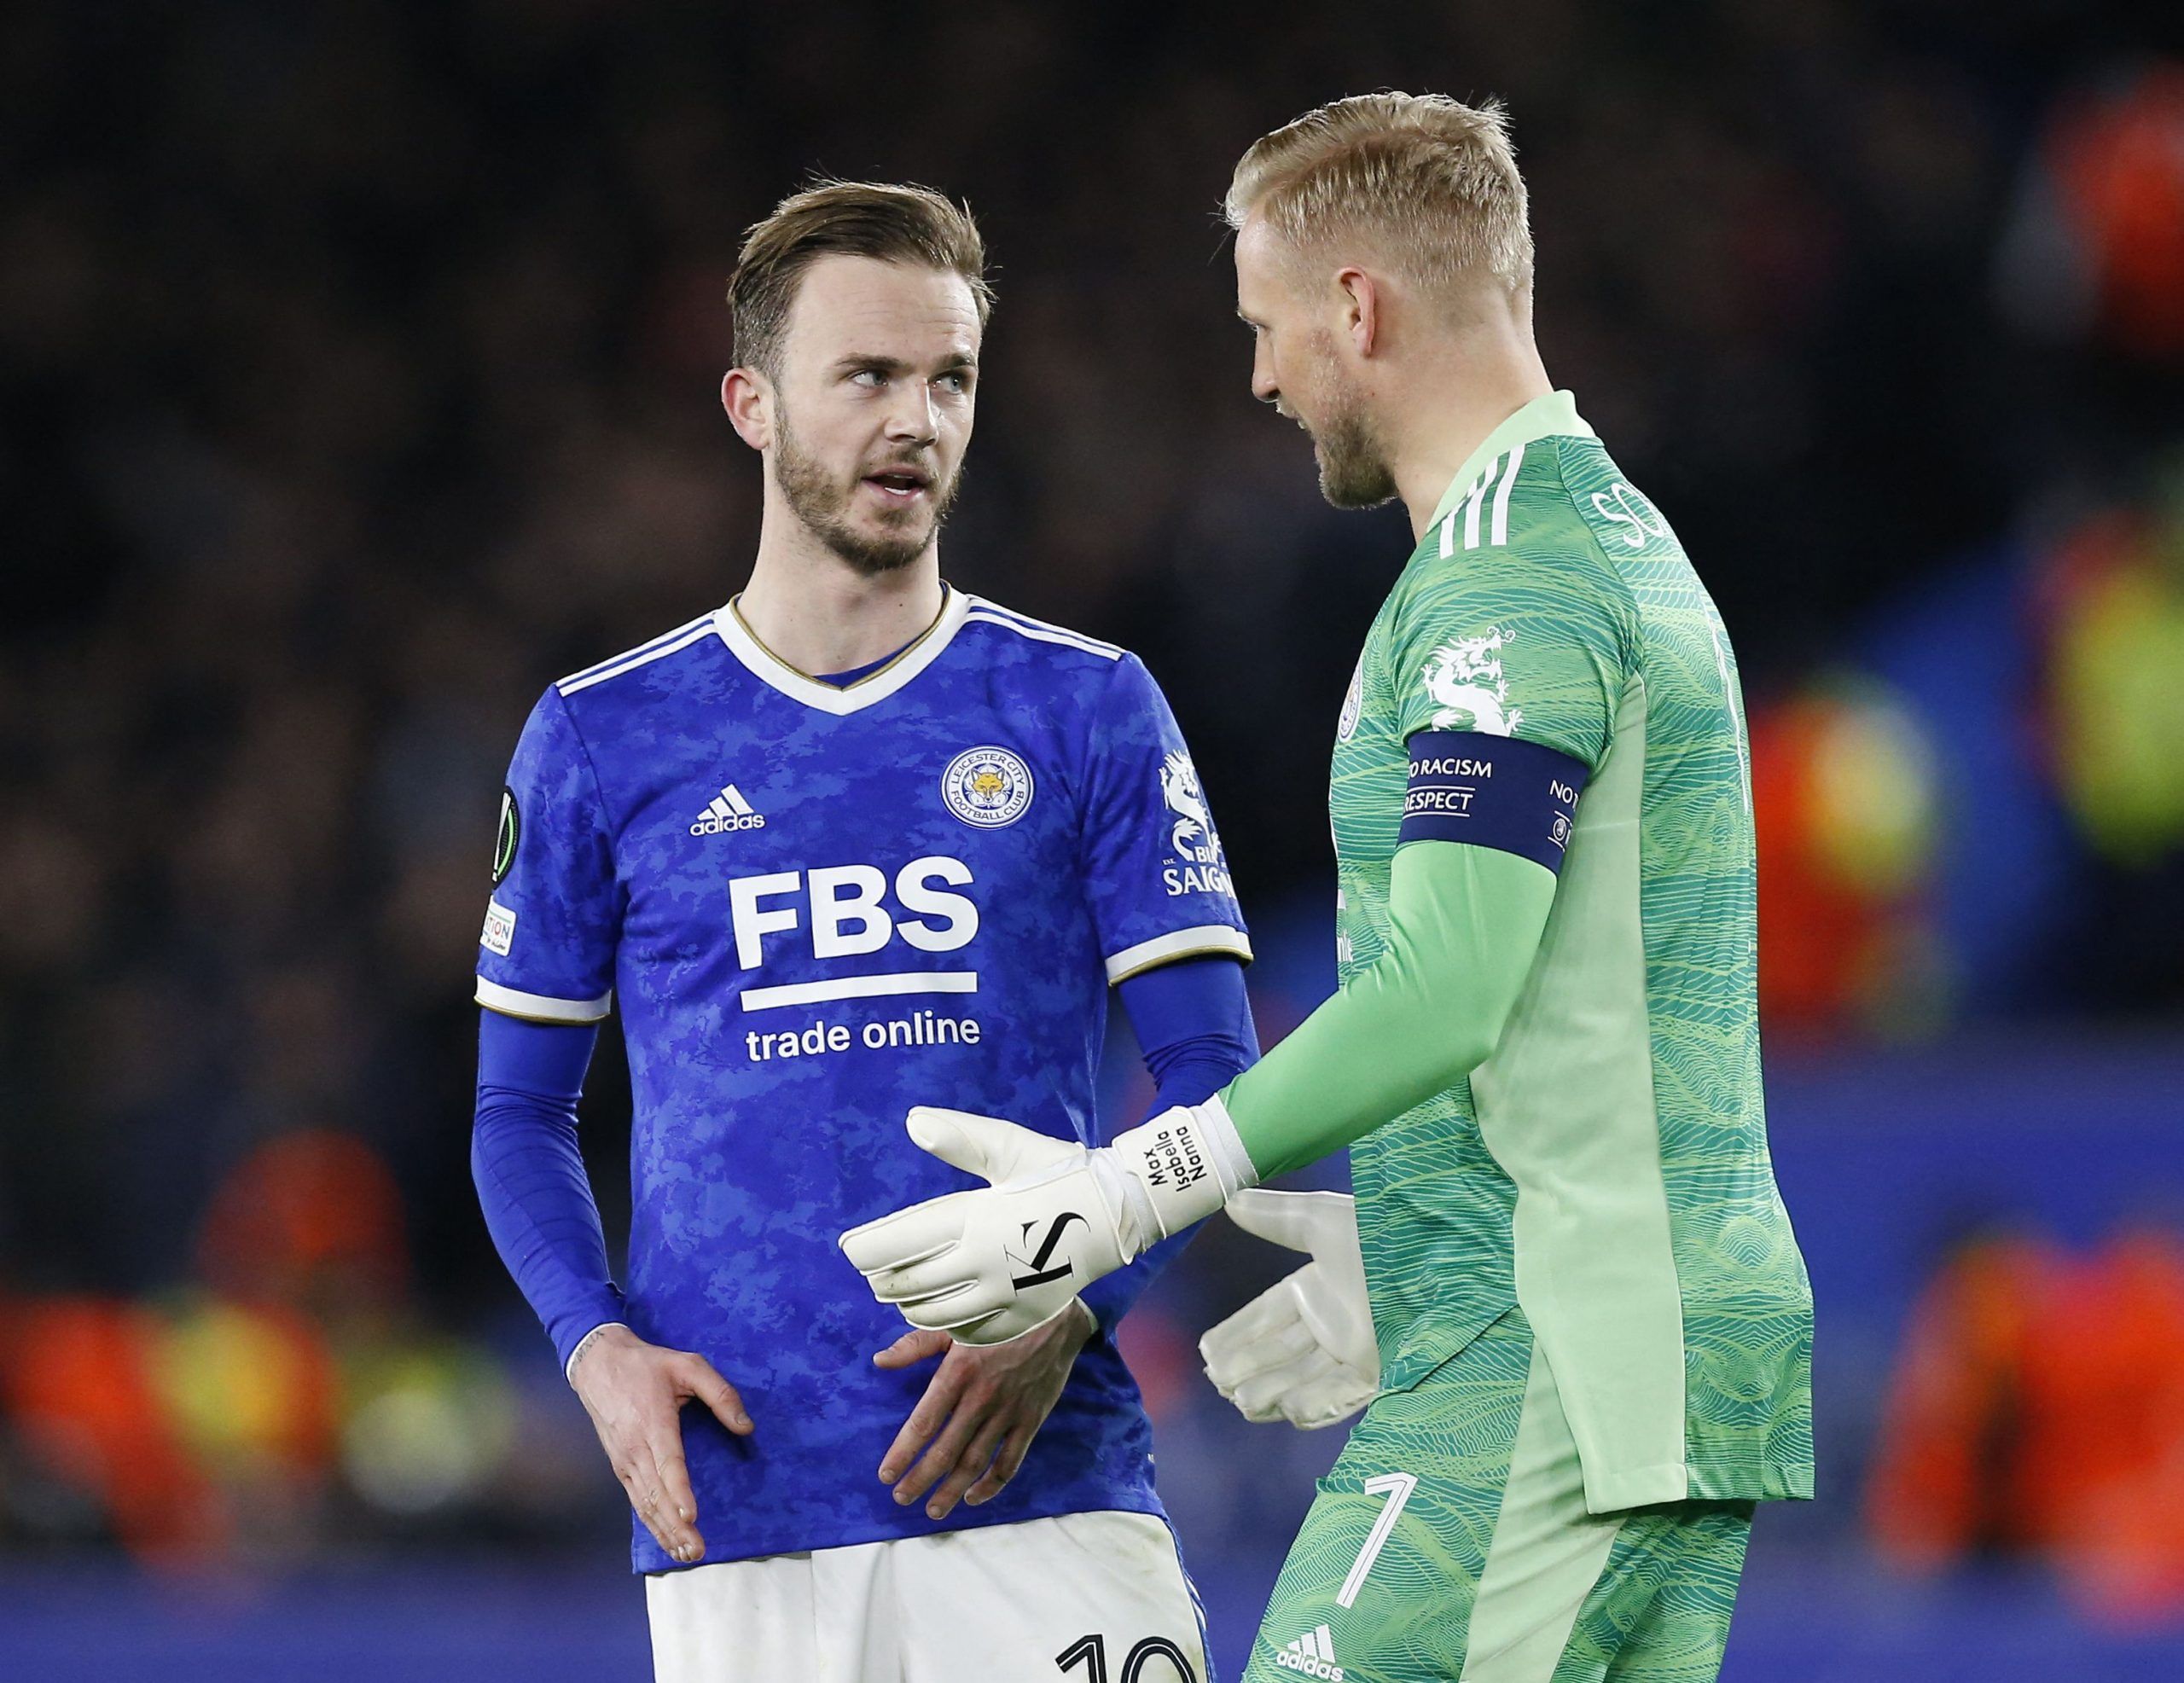 Soccer Football - Europa League - Quarter Final - First Leg - Leicester City v PSV Eindhoven - King Power Stadium, Leicester, Britain - April 7, 2022  Leicester City's James Maddison and Kasper Schmeichel fans after the match REUTERS/Craig Brough